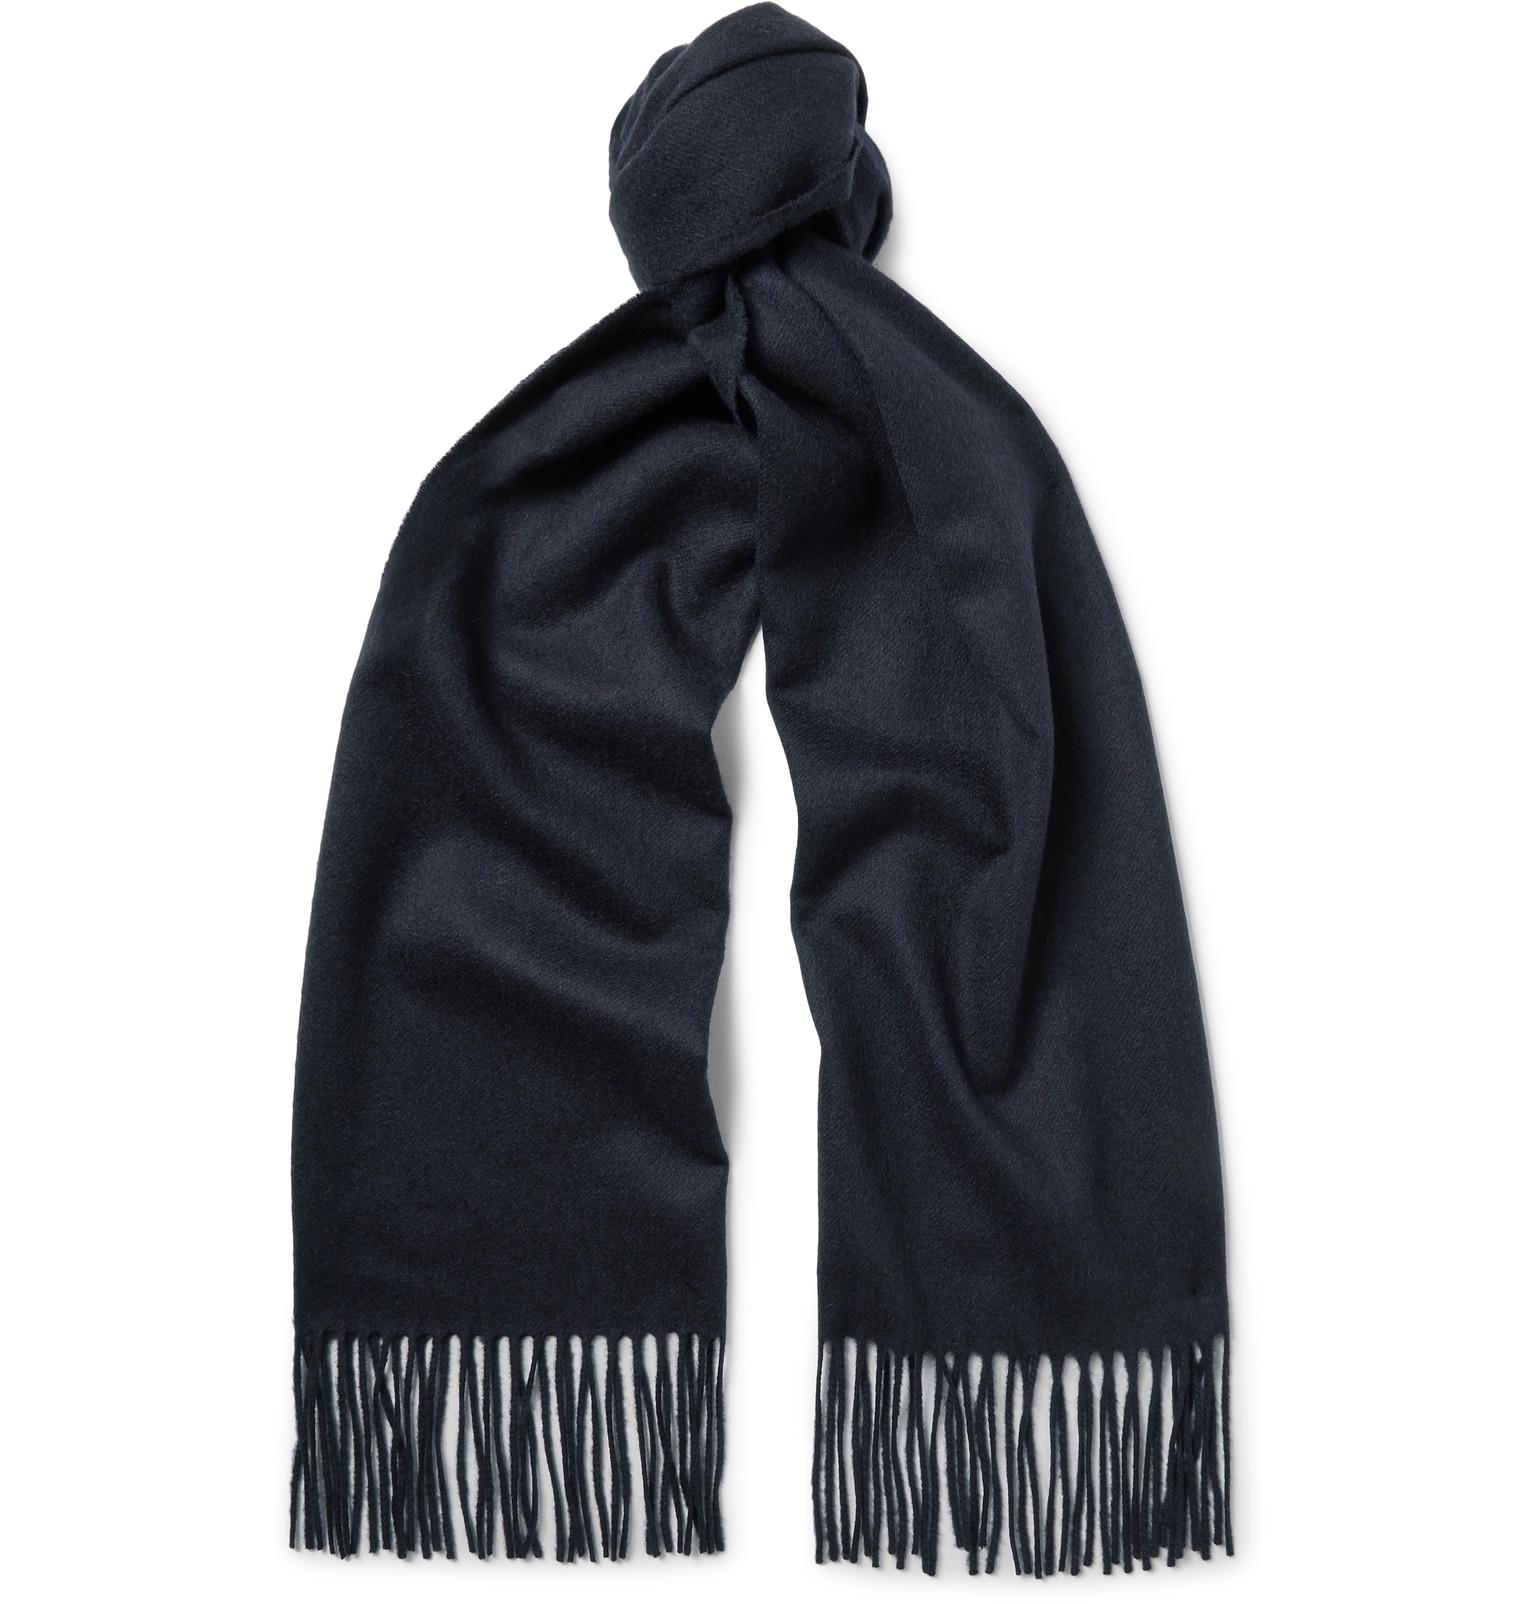 Johnstons Fringed Cashmere Scarf in Midnight Blue (Blue) for Men - Lyst